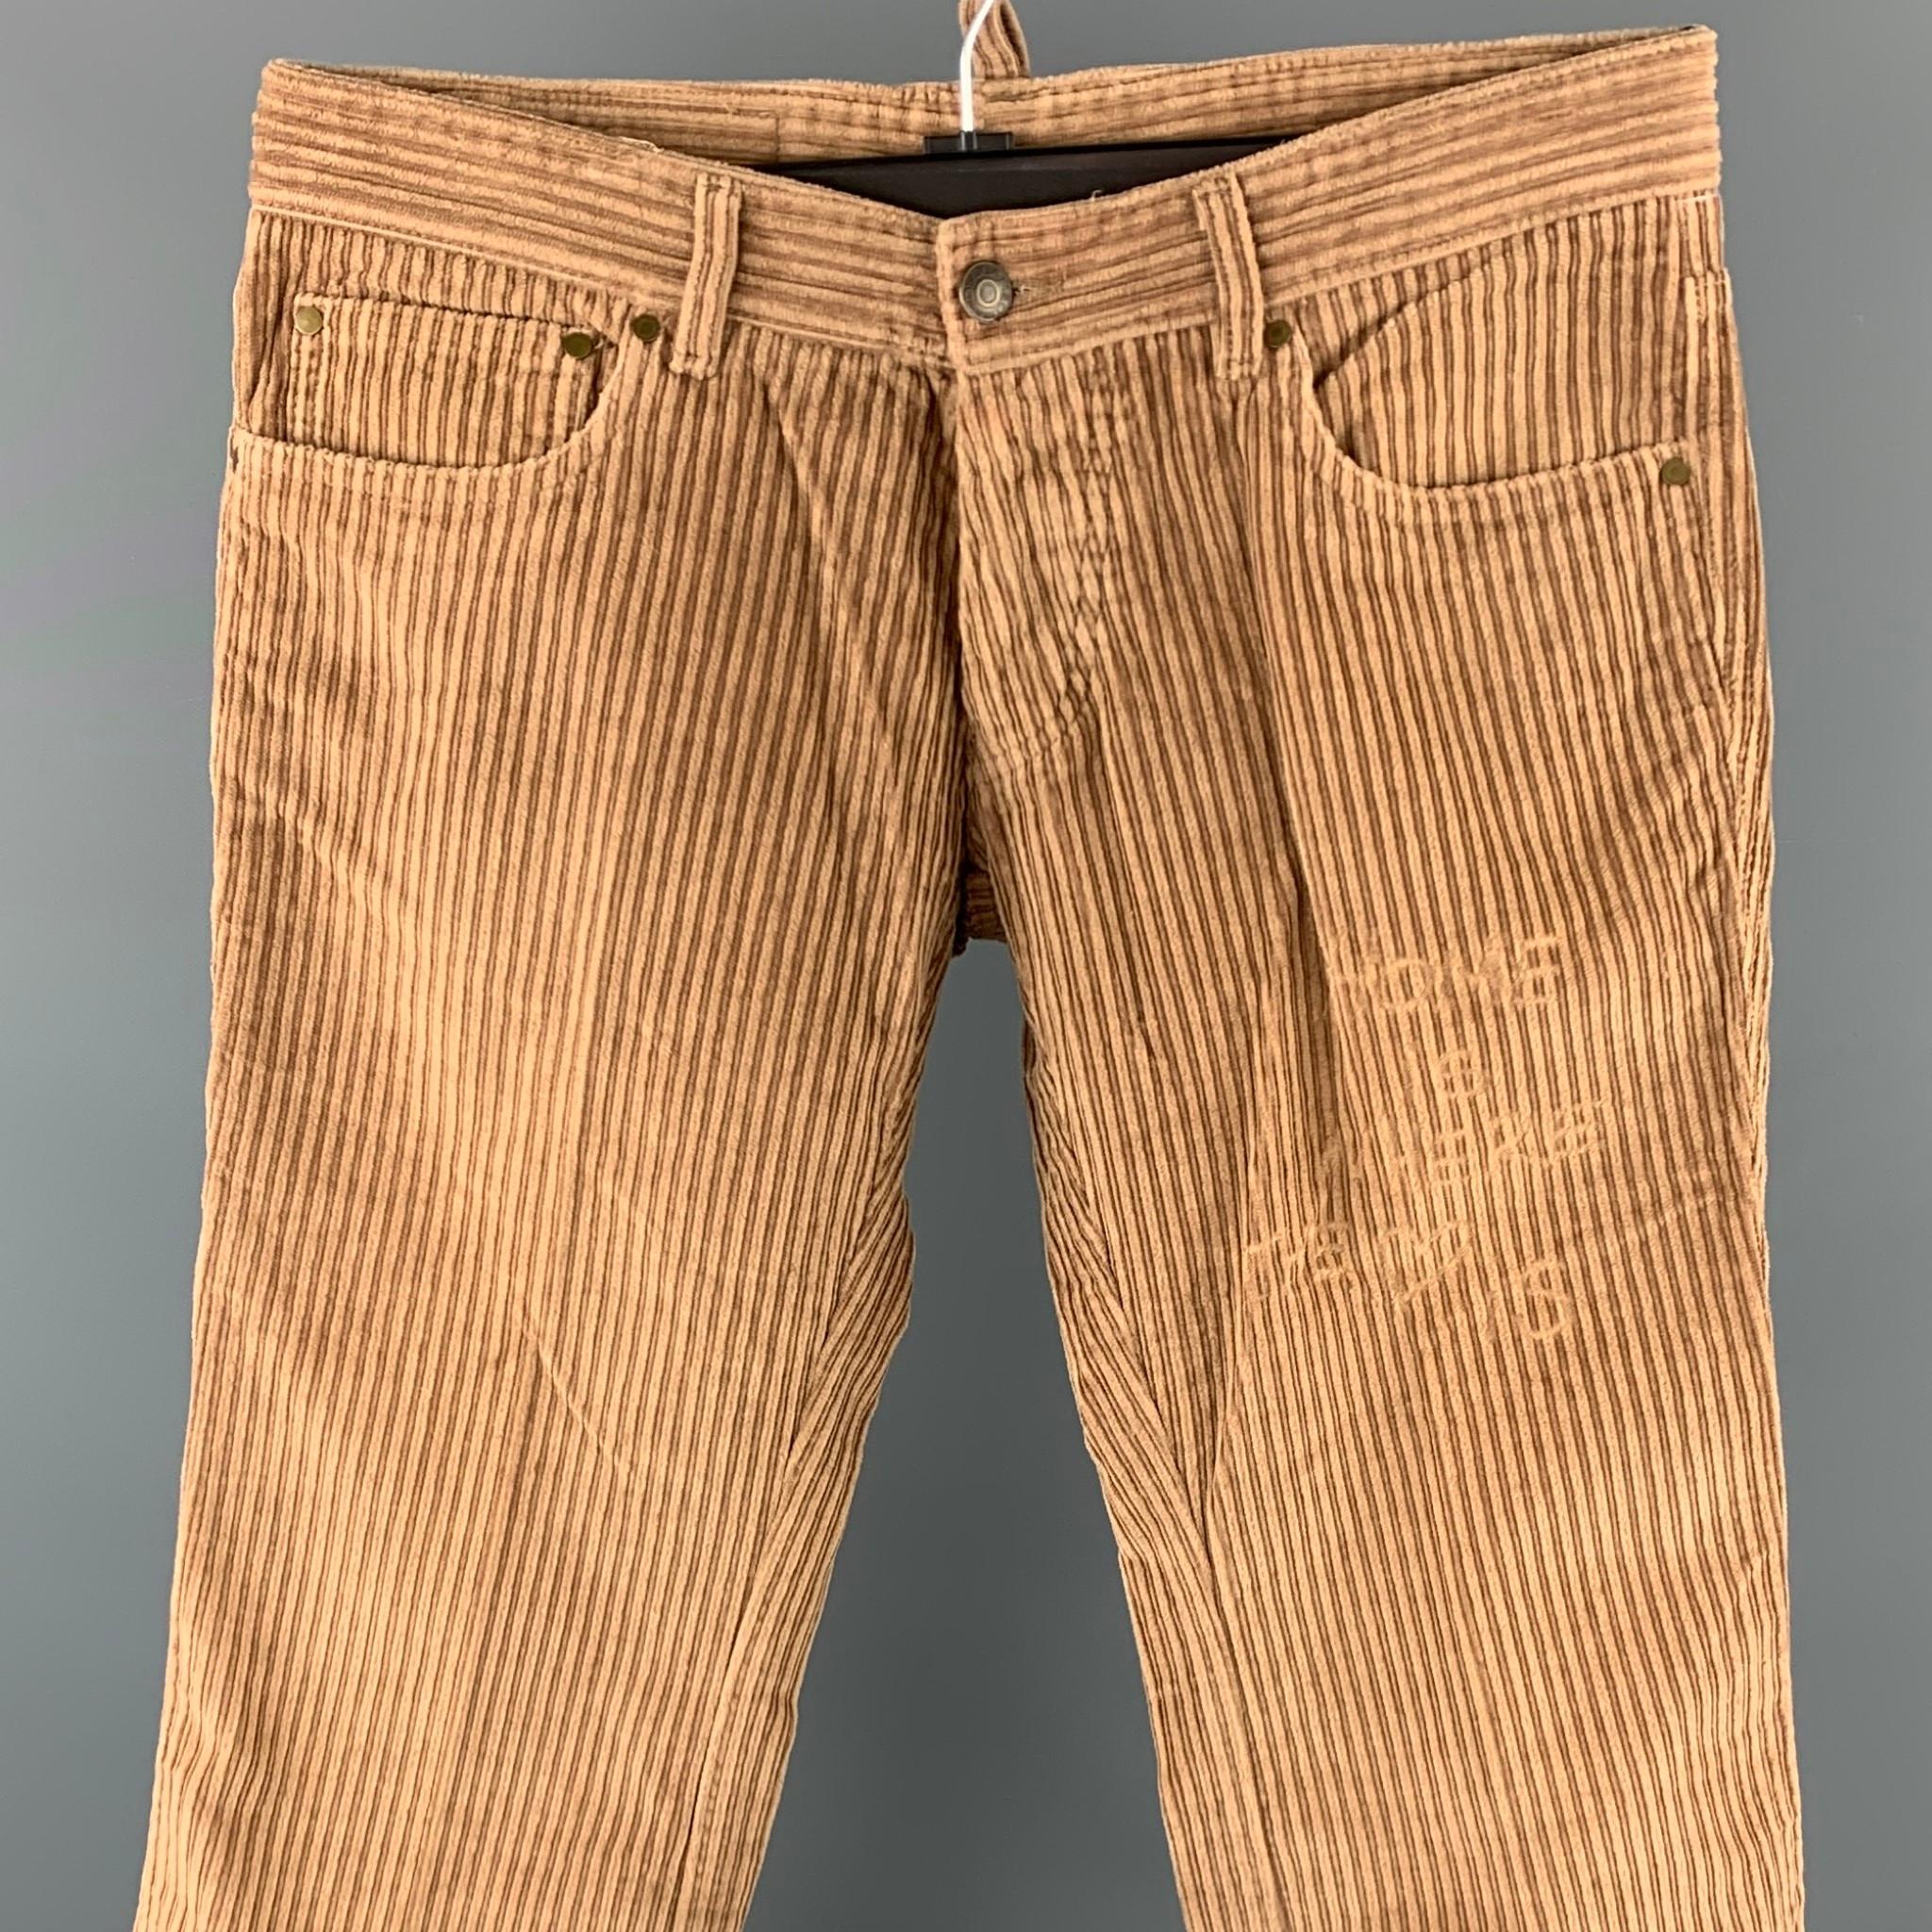 DSQUARED2 casual pants comes in a tan corduroy with a engraved 